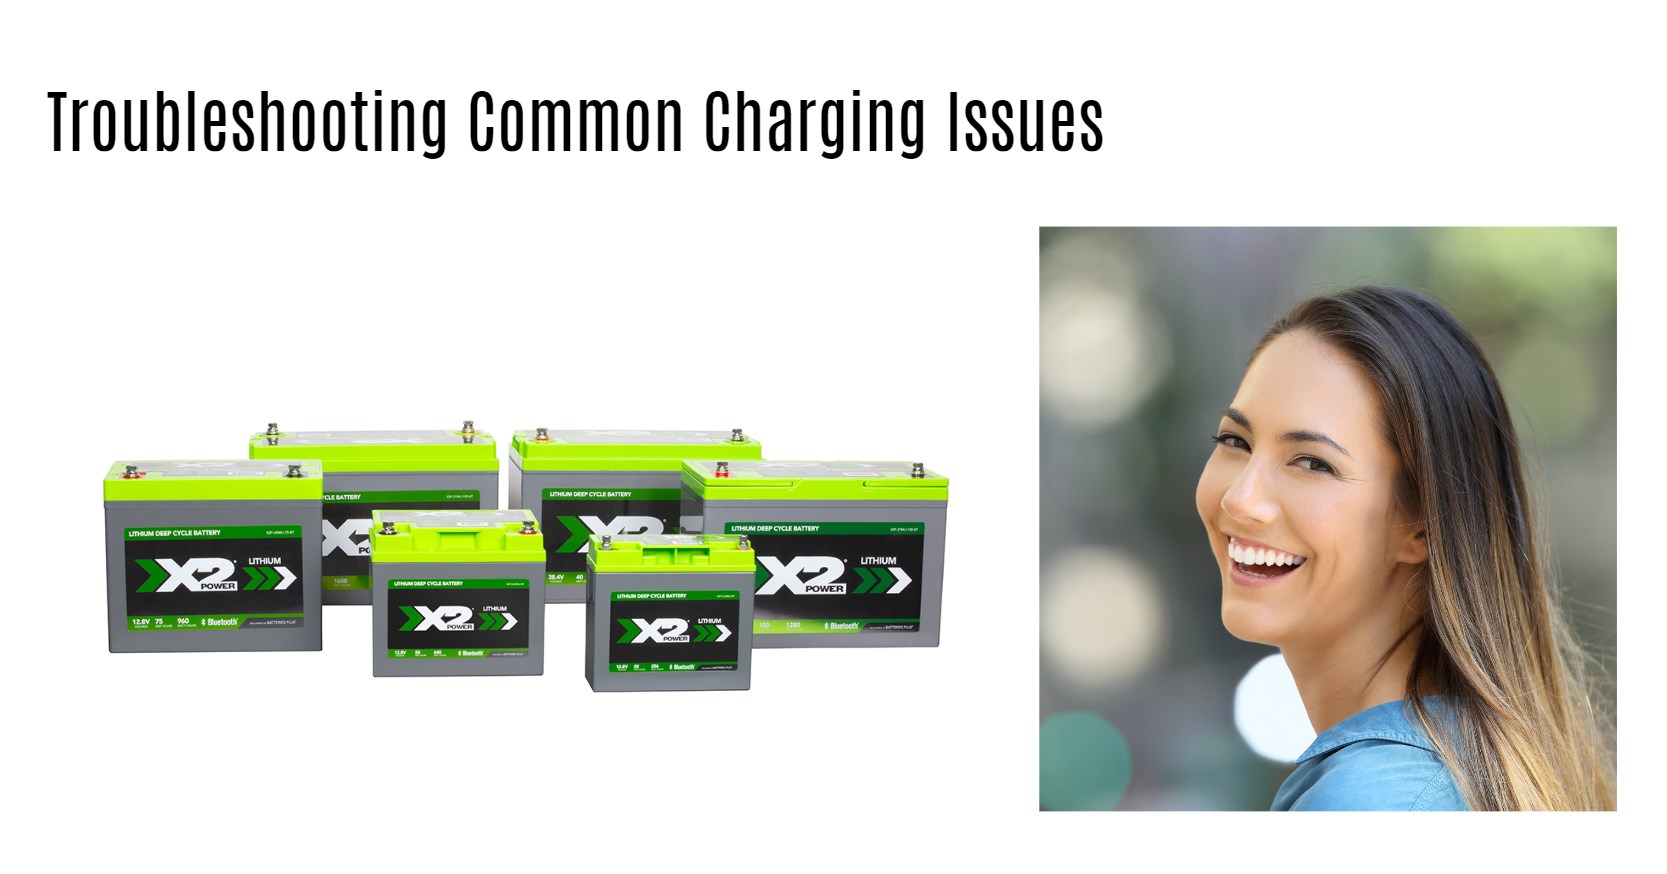 Troubleshooting Common Charging Issues